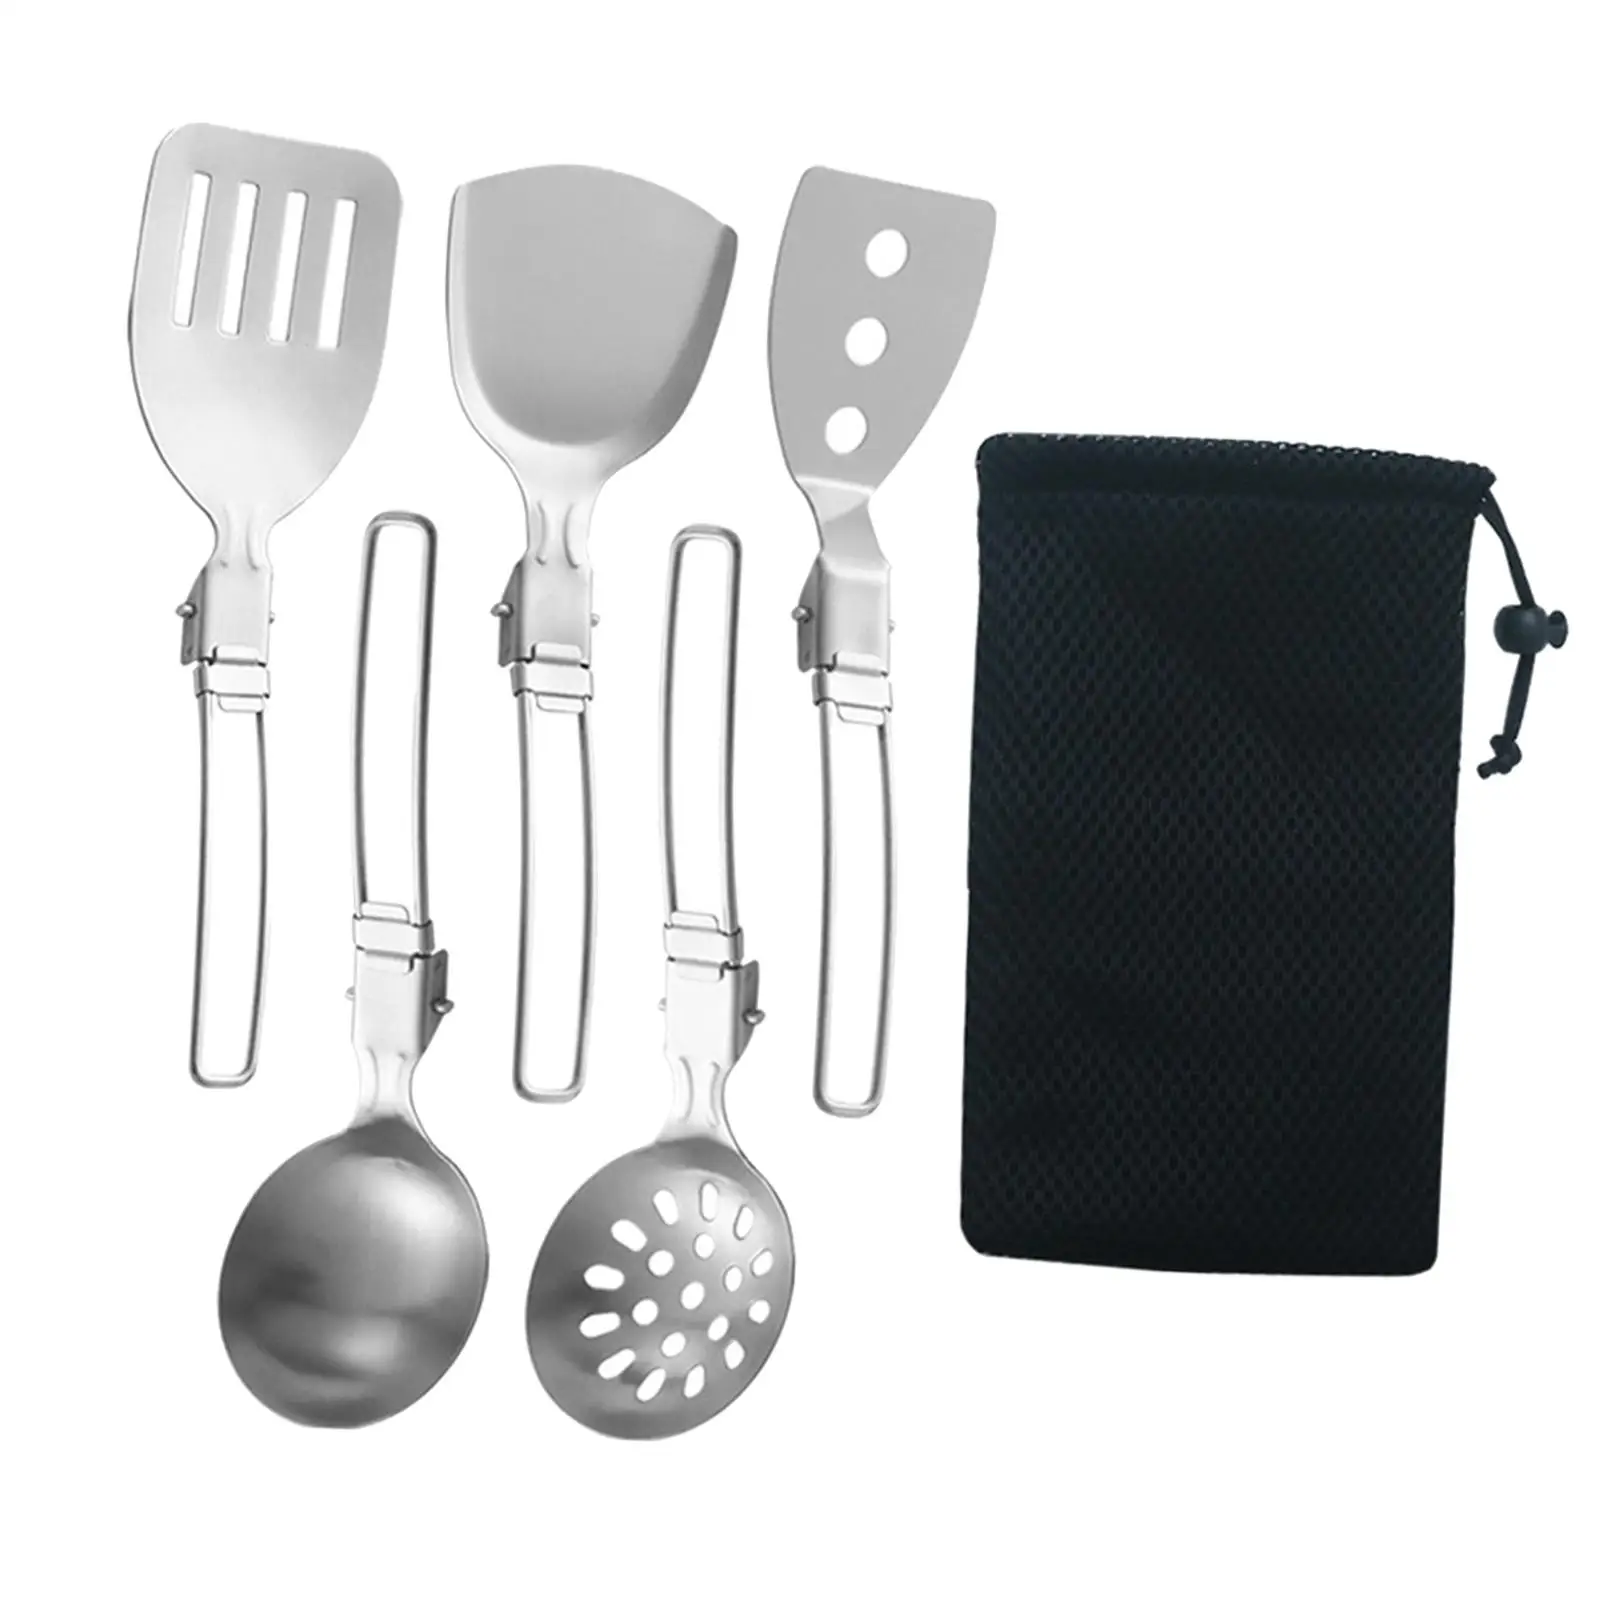 6x Camp Cooking Utensil Set Compact Metal Cookware Kit for Picnic BBQ Travel